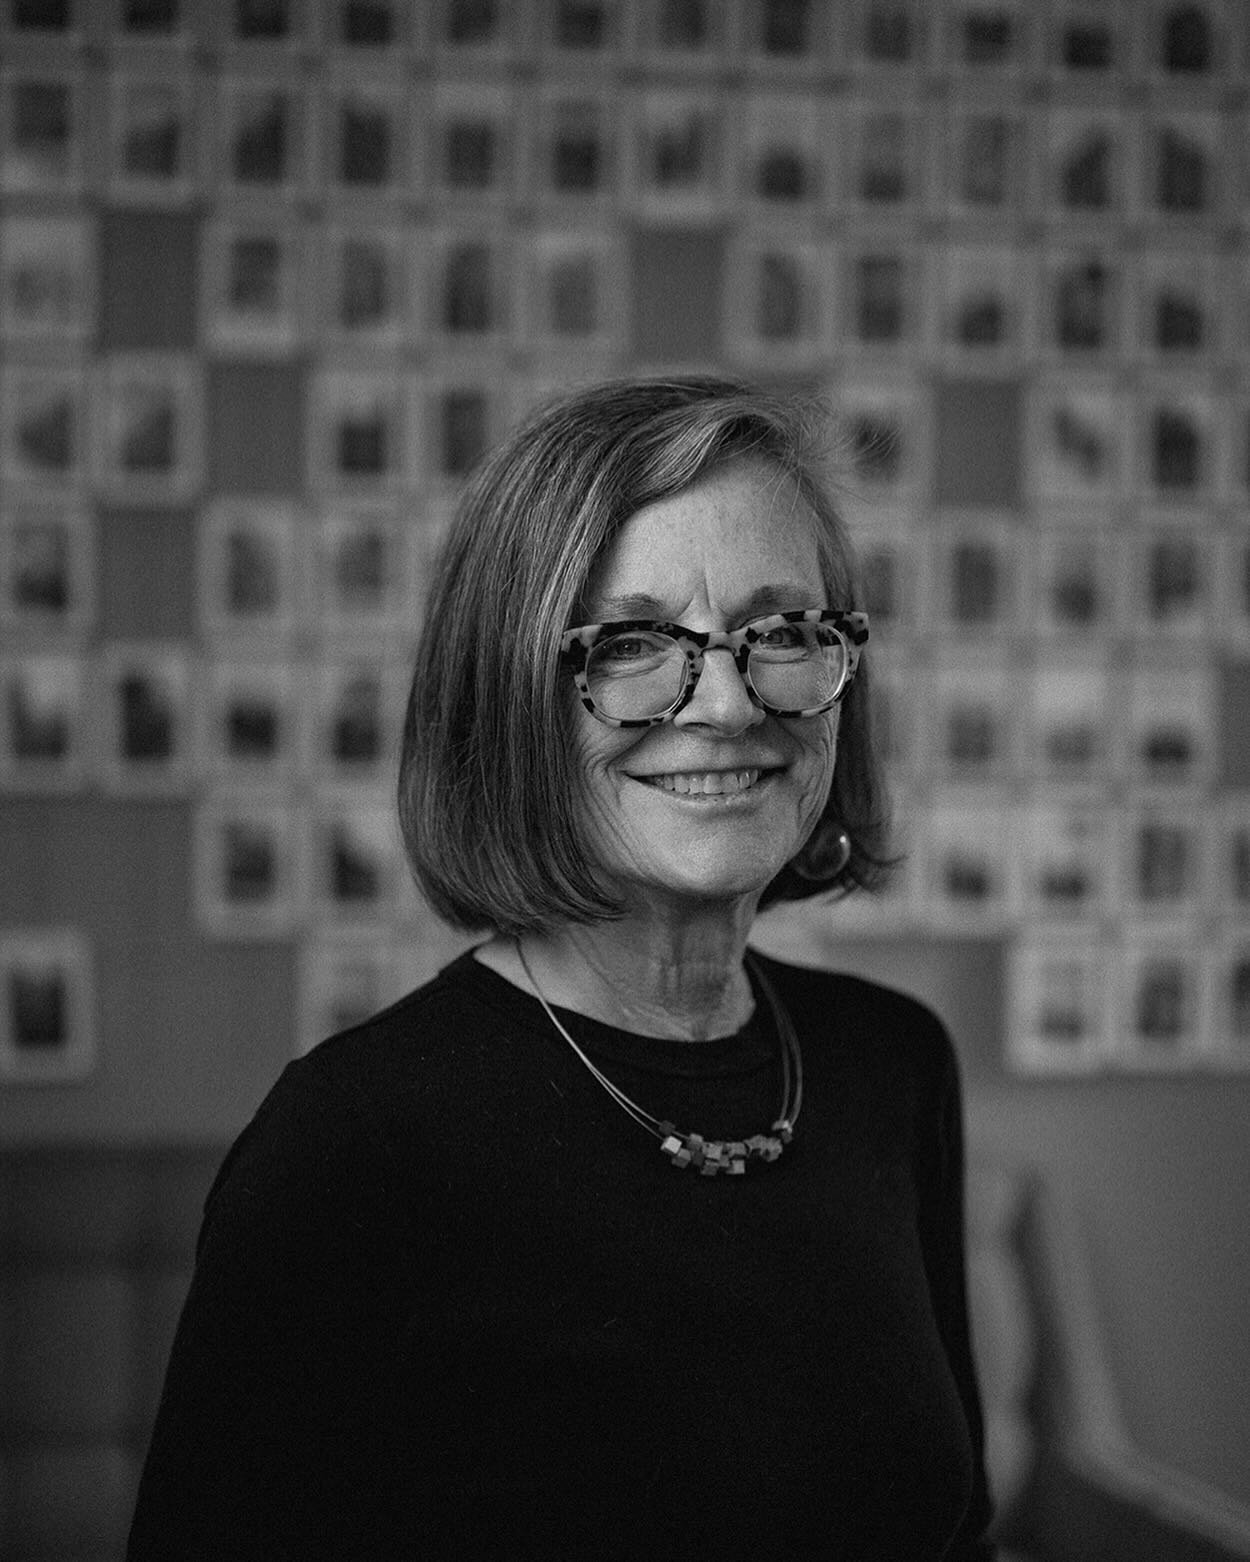 Congratulations to our very own Kathleen Lechleiter, FAIA,  for her elevation to the American Institute of Architect&rsquo;s College of Fellows!  In her 30+ year career, Kathleen has focused heavily on creating equitable and healthy communities, publ